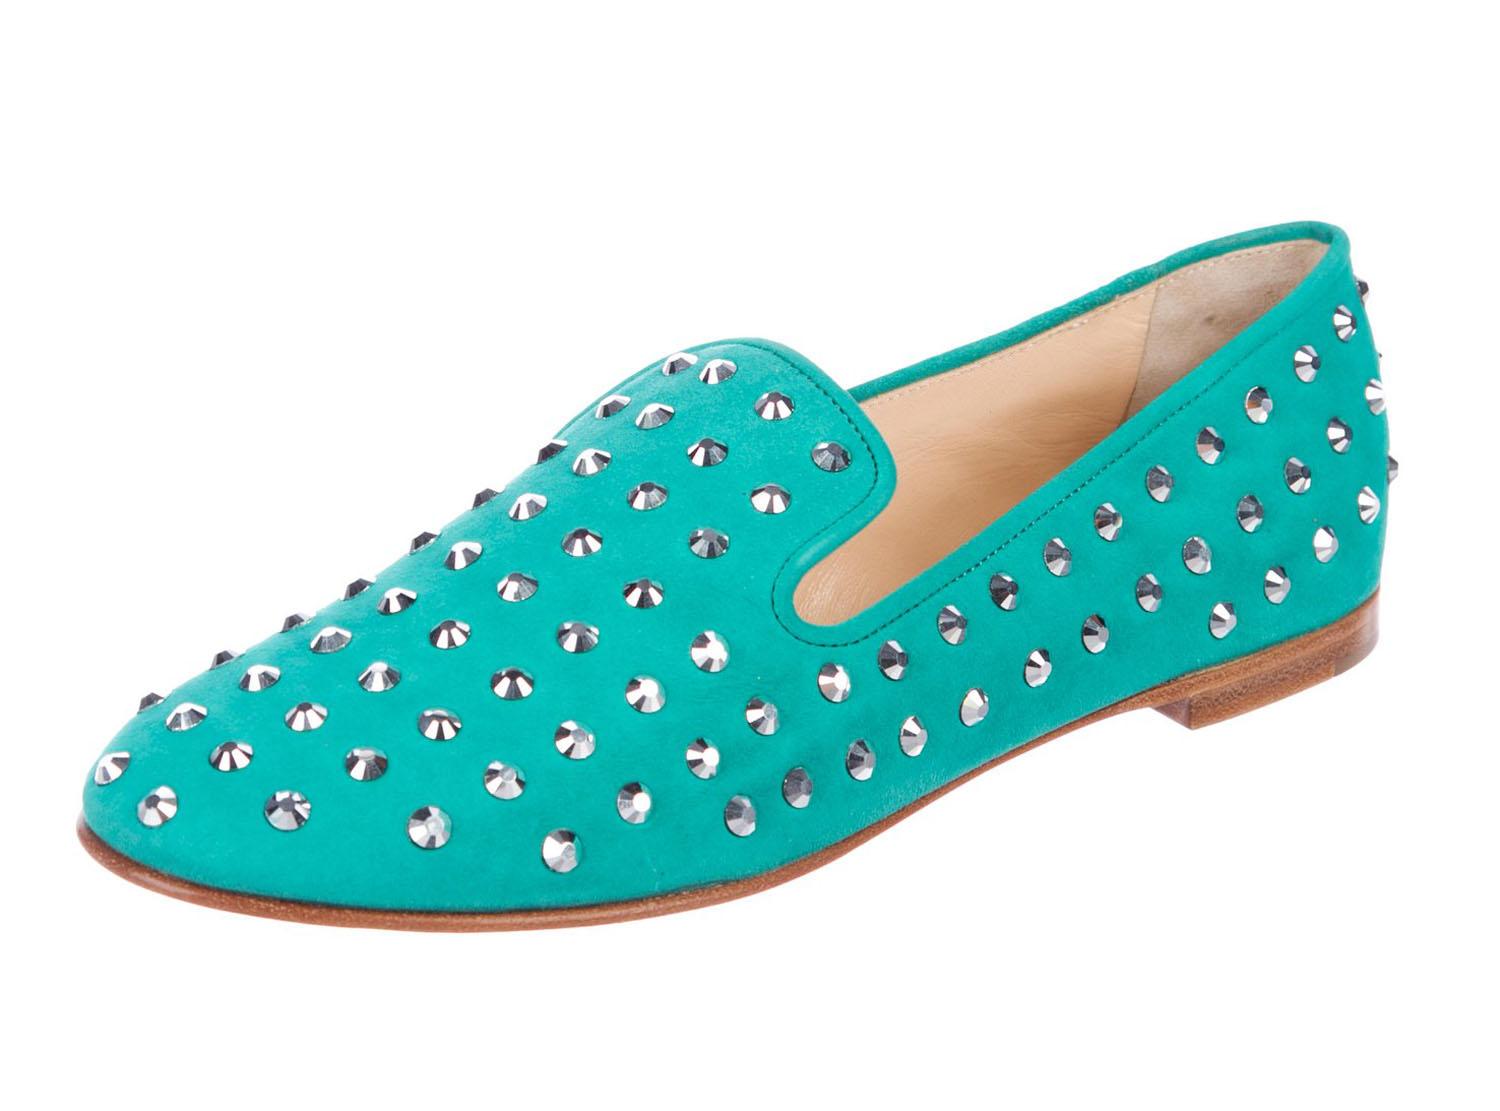 New Giuseppe Zanotti Women's Suede Flats Loafers
Designer size 38 - US 8
Aquamarine Suede, Mirrored Silver Tone Studs, Round Toe-line, Leather Sole and Insole. Light Weight and Comfortable.
Made in Italy
Retail $785.00
New with box.

Listing code: